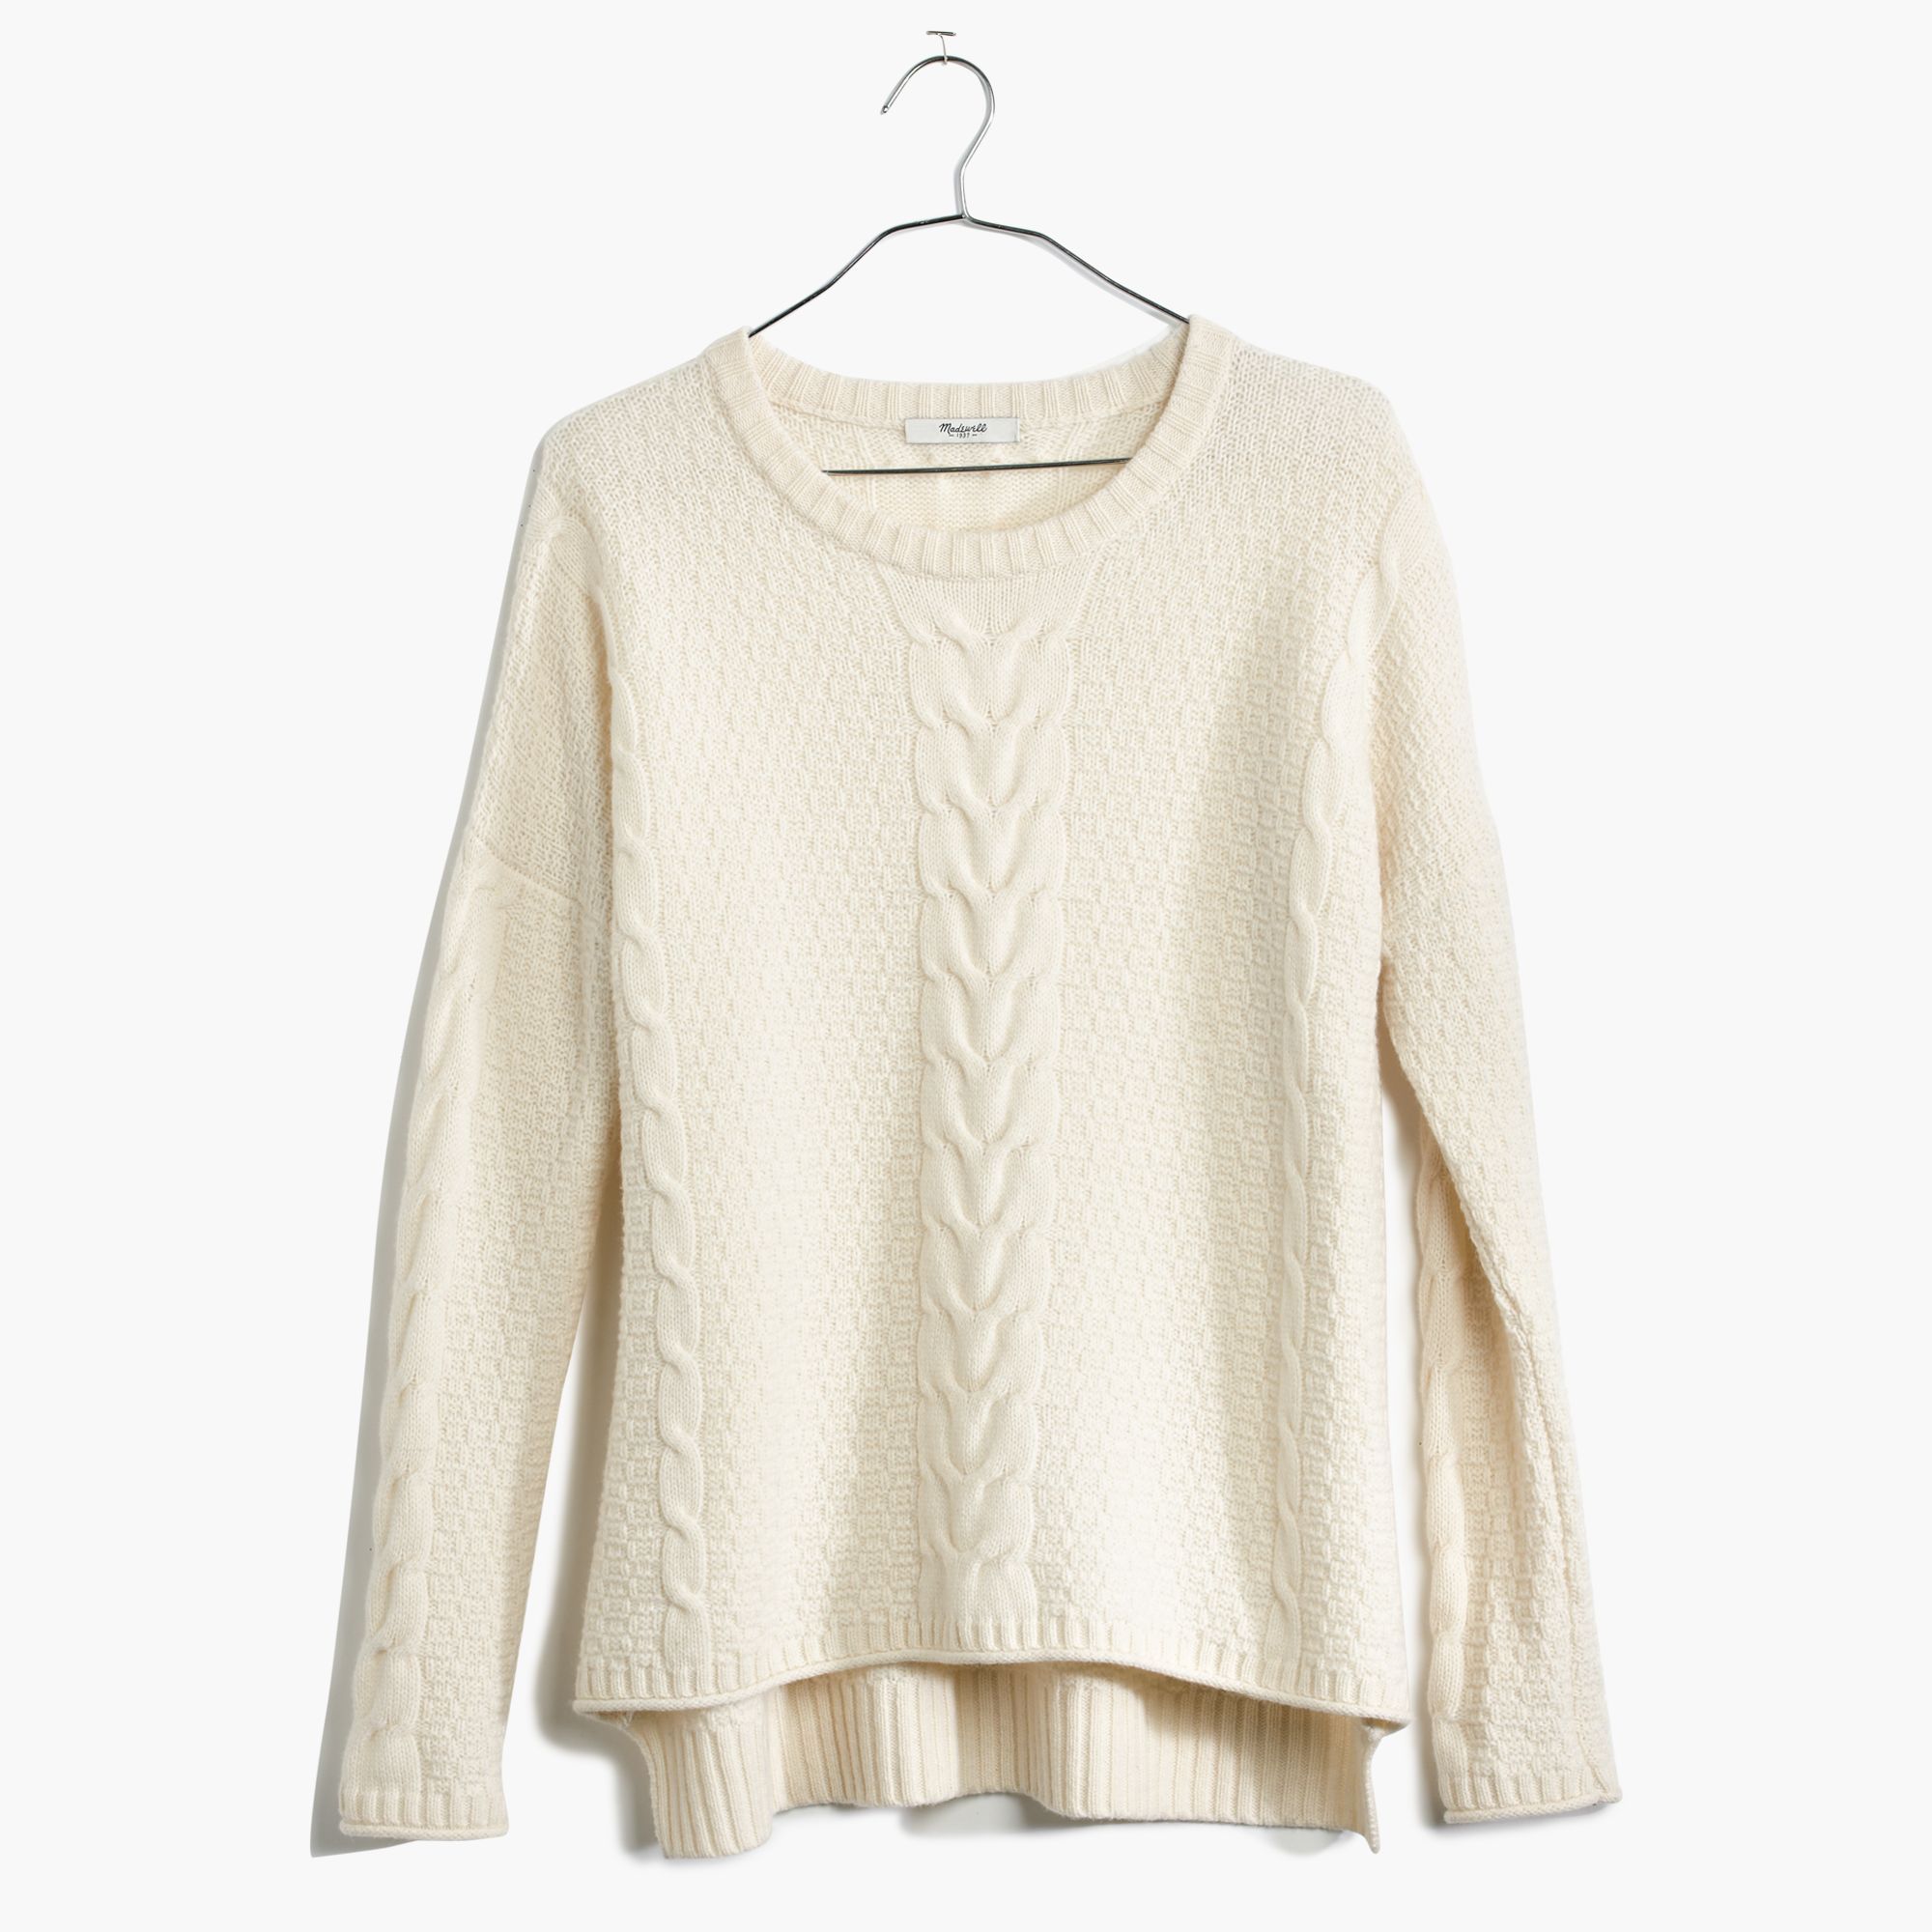 madewell-white-easy-cable-pullover-sweater-product-1-25612818-1-423306488-normal.jpeg